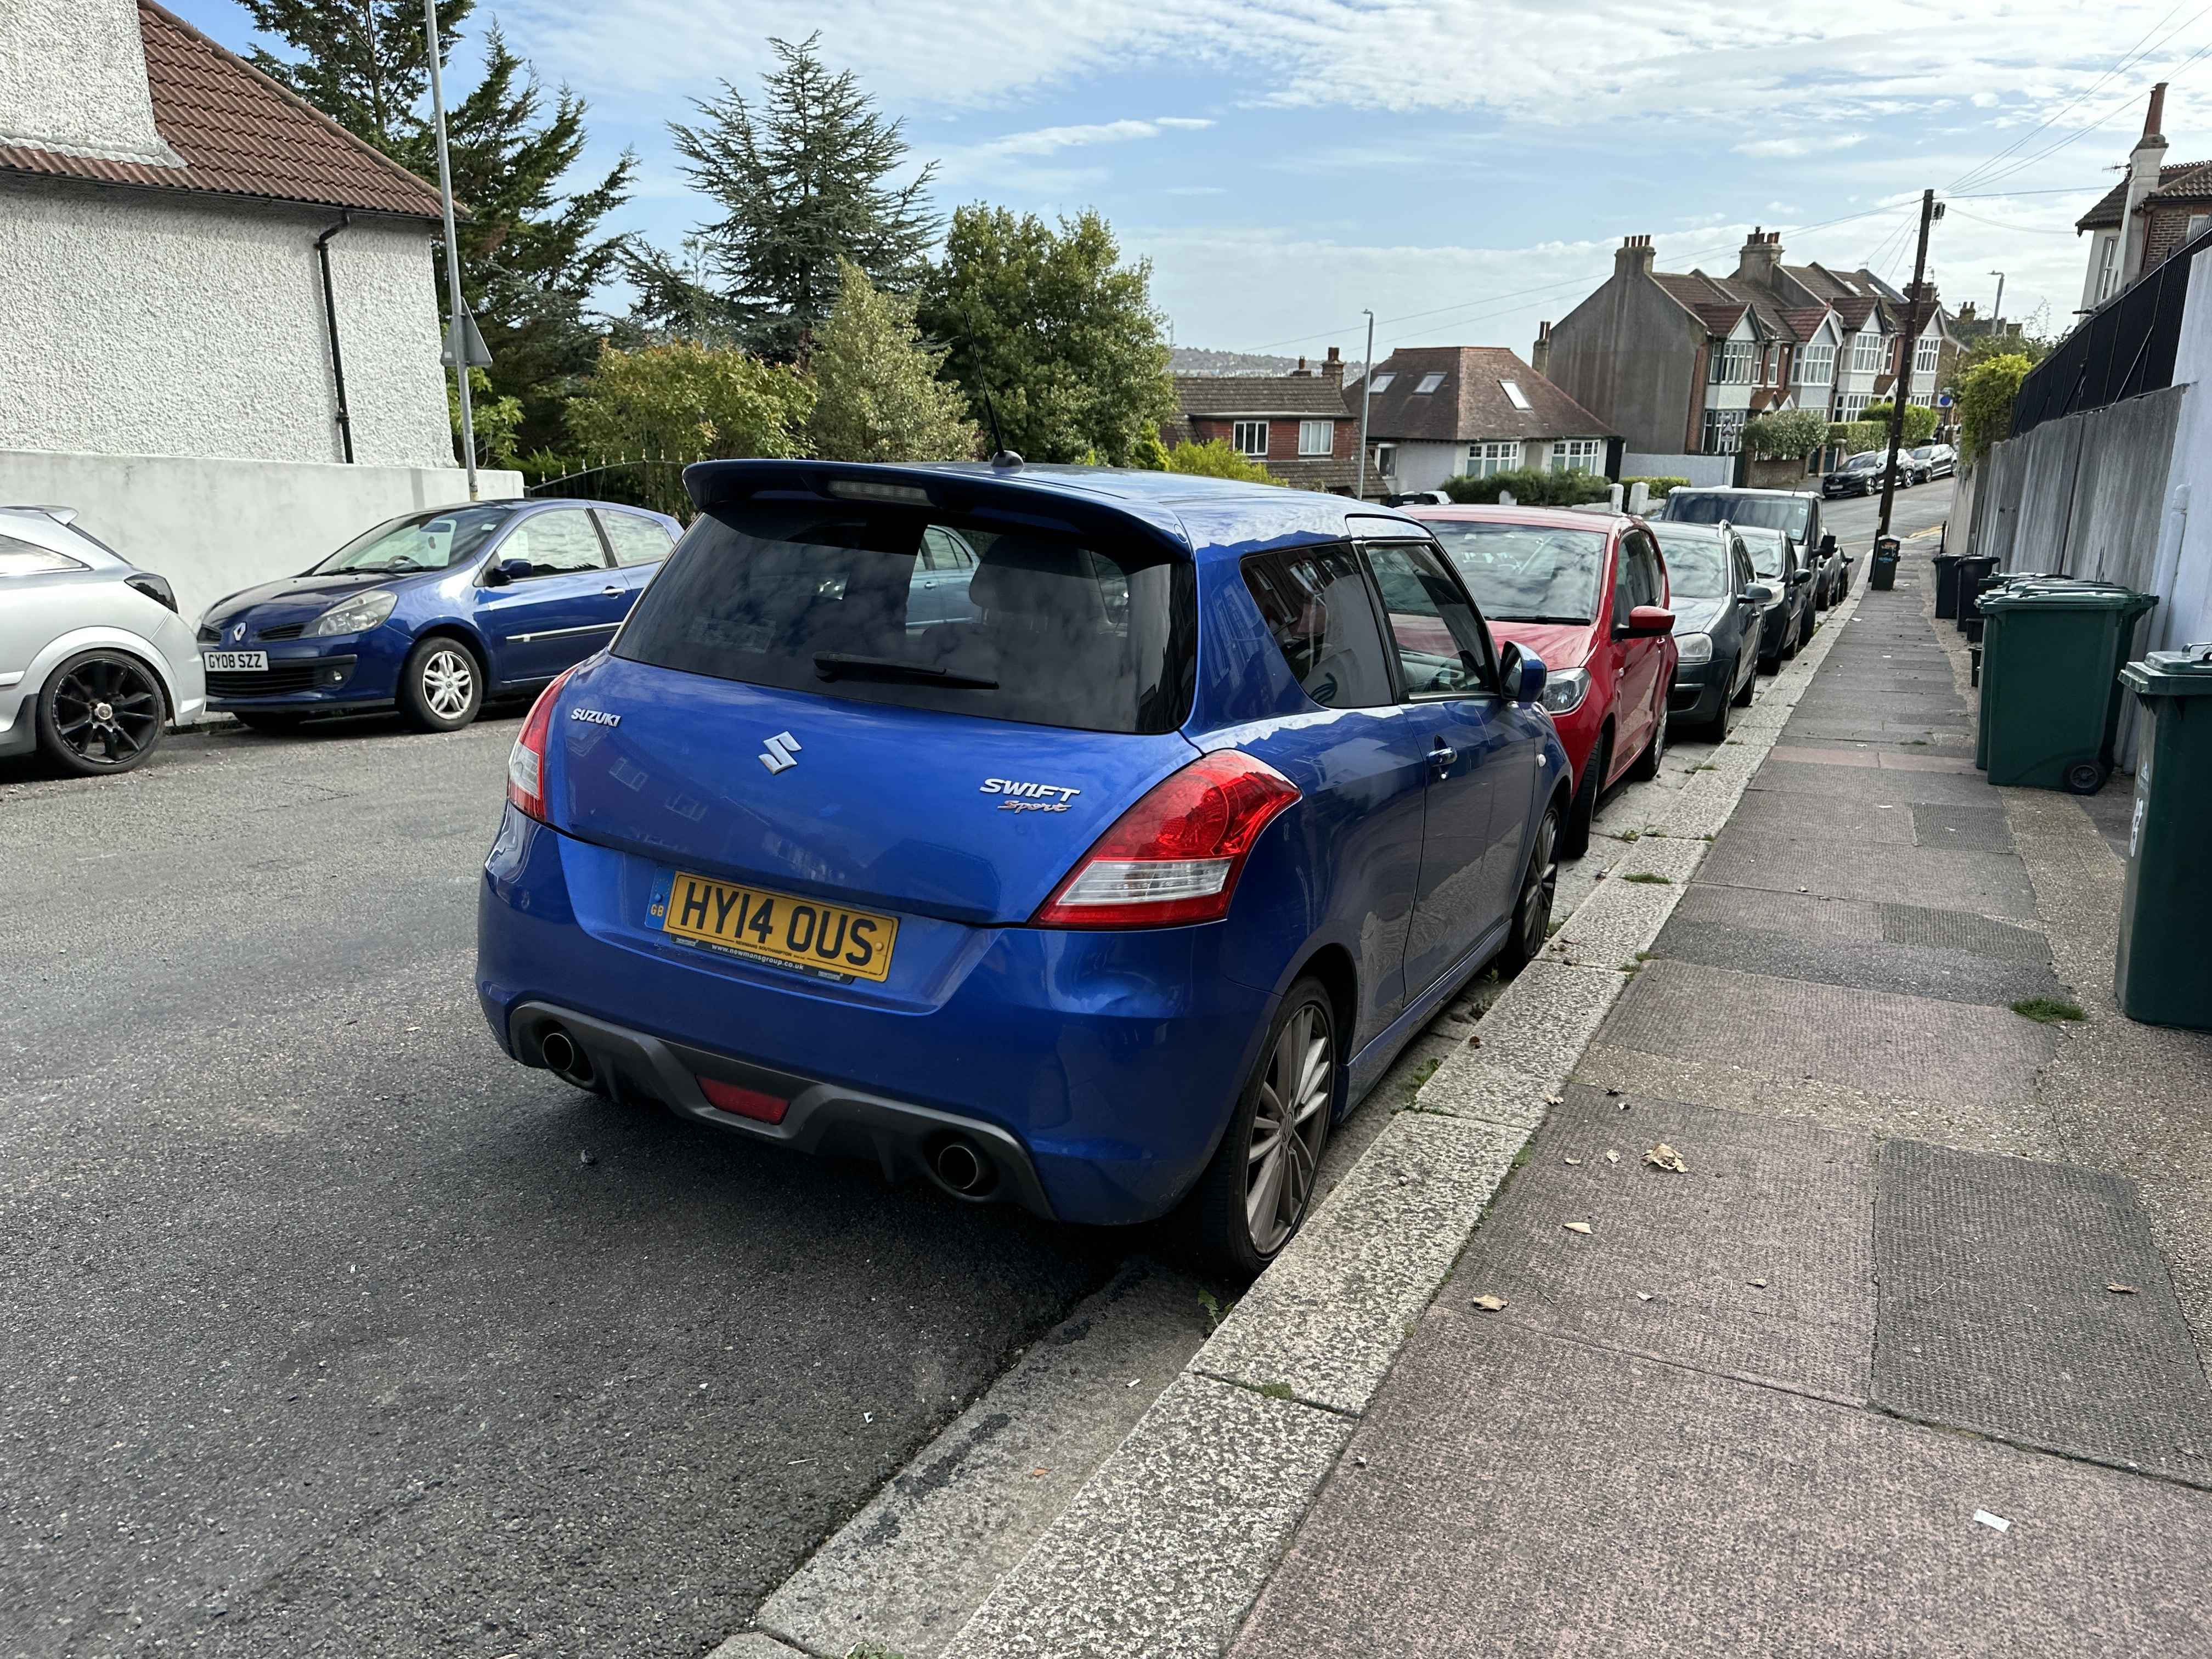 Photograph of HY14 OUS - a Blue Suzuki Swift parked in Hollingdean by a non-resident. The third of four photographs supplied by the residents of Hollingdean.